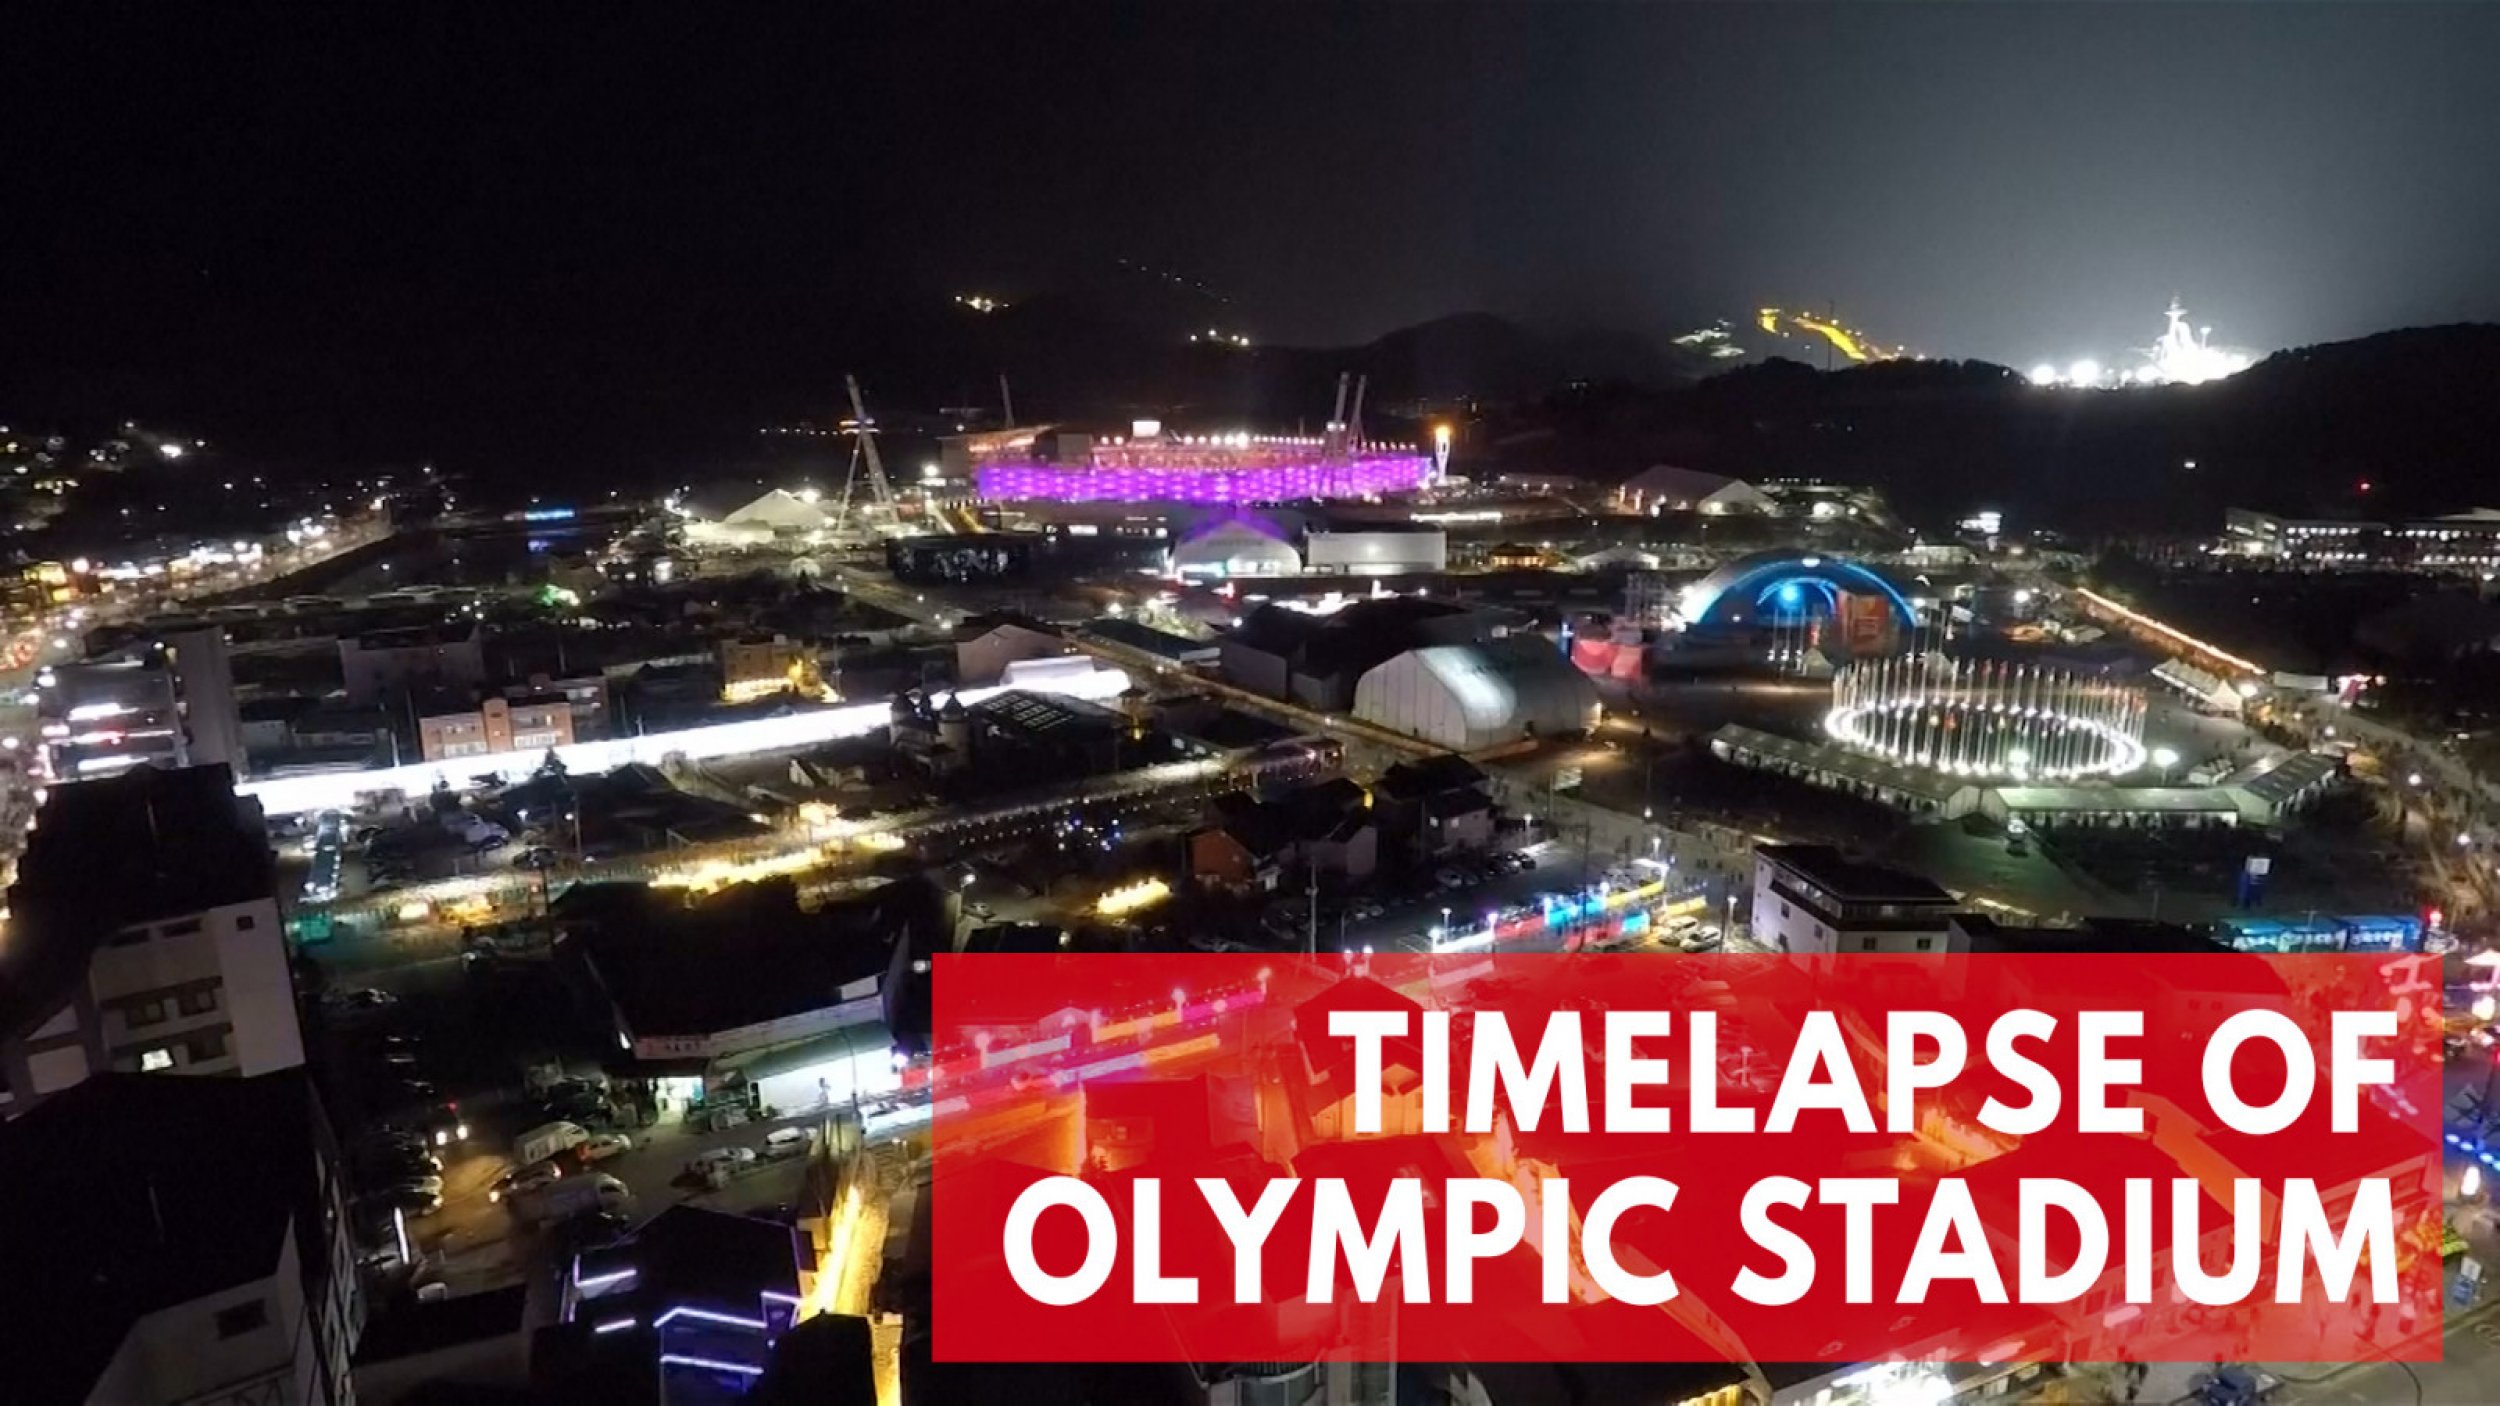 Timelapse Of Skies Over Olympic Stadium in Pyeongchang